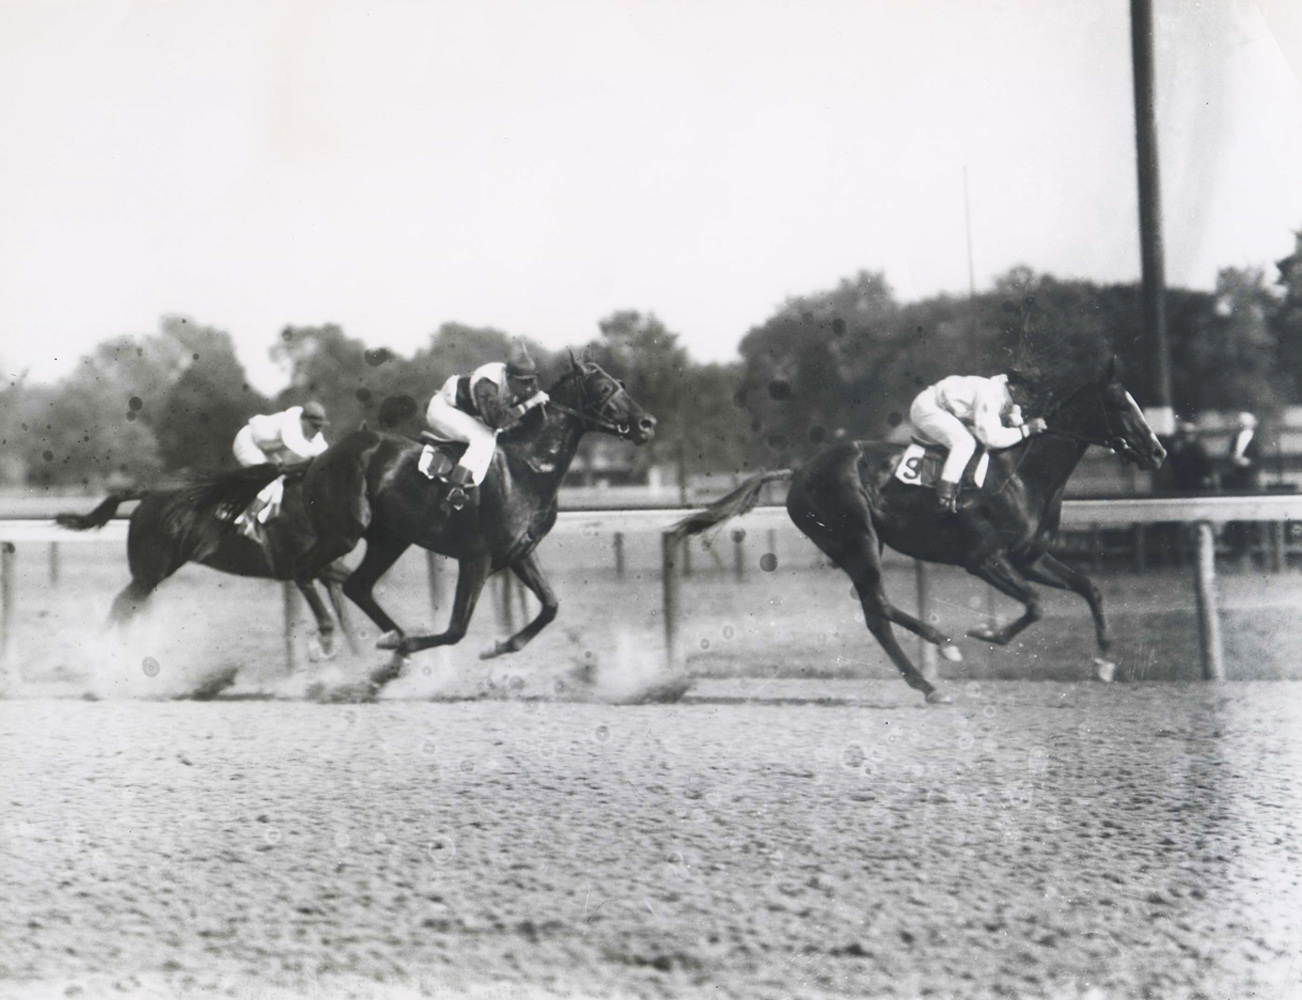 Regret (Joe Notter up) winning the 1914 Sanford Memorial Stakes at Saratoga (Keeneland Library Cook Collection/Museum Collection)